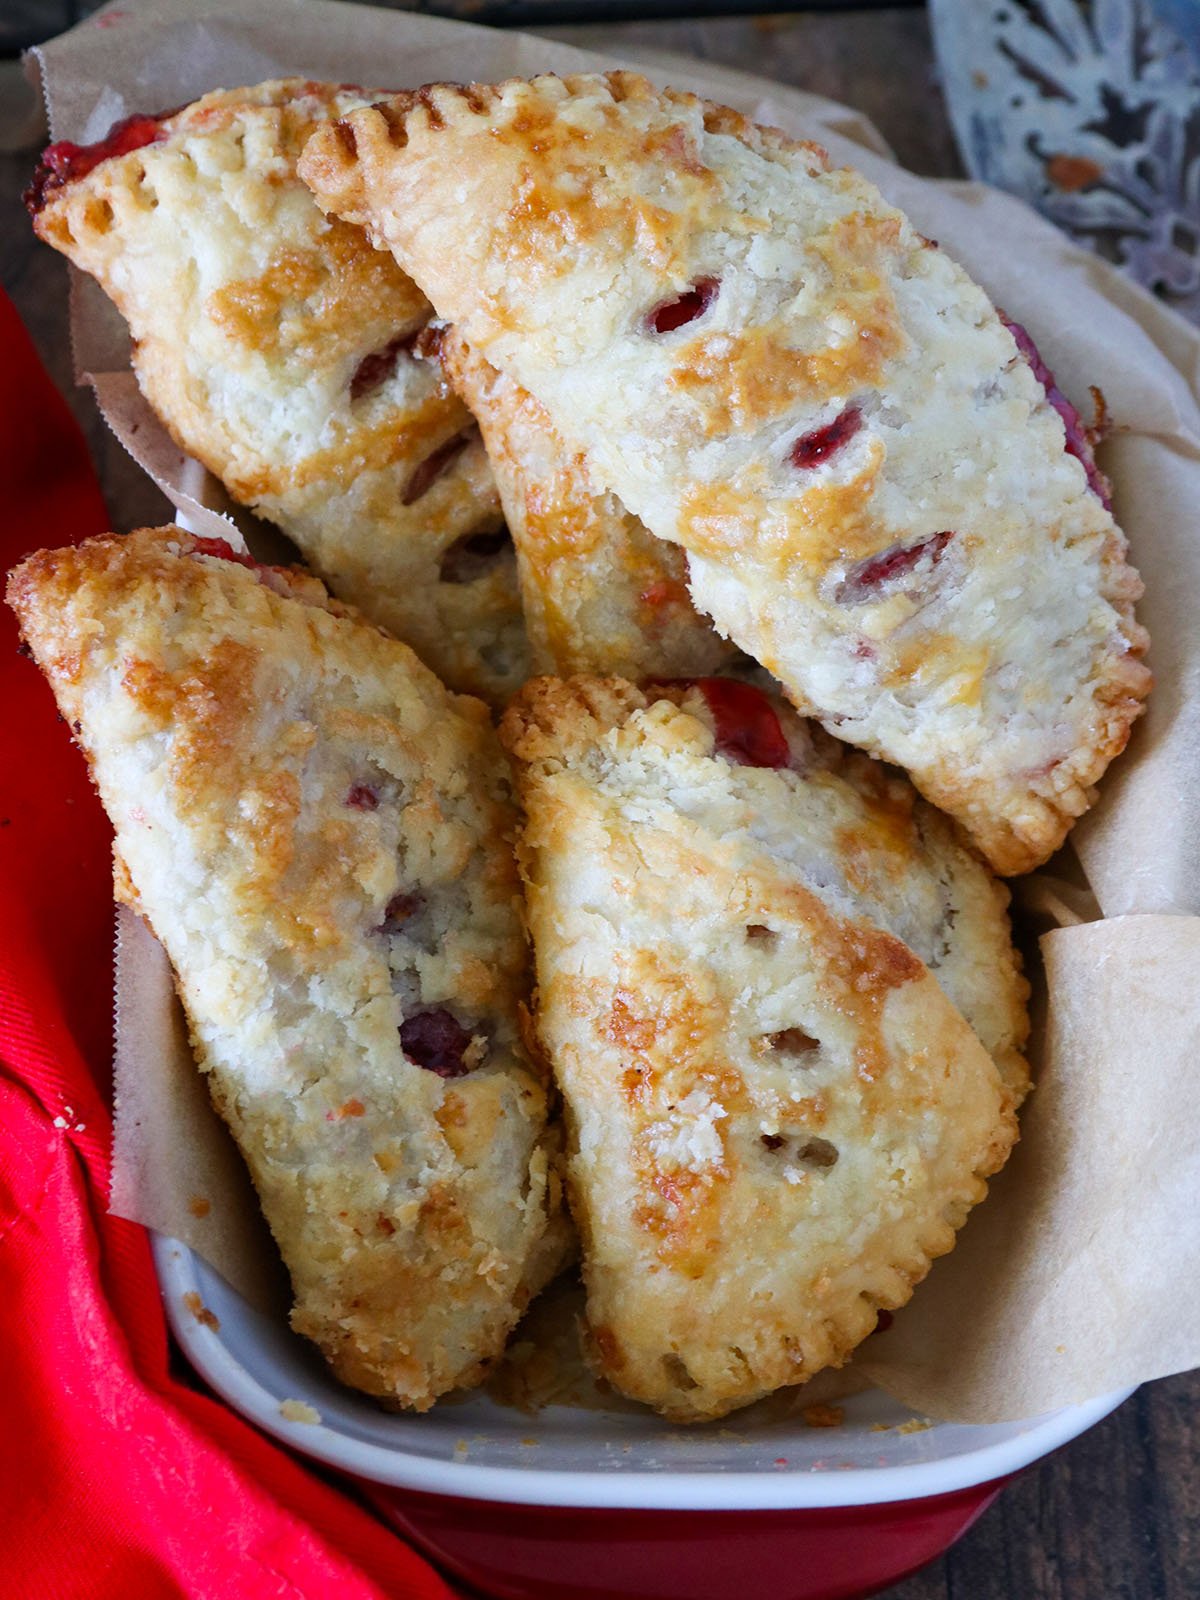 Homemade Cherry Hand Pies in a cloth-lined basket with fresh cherries on the side